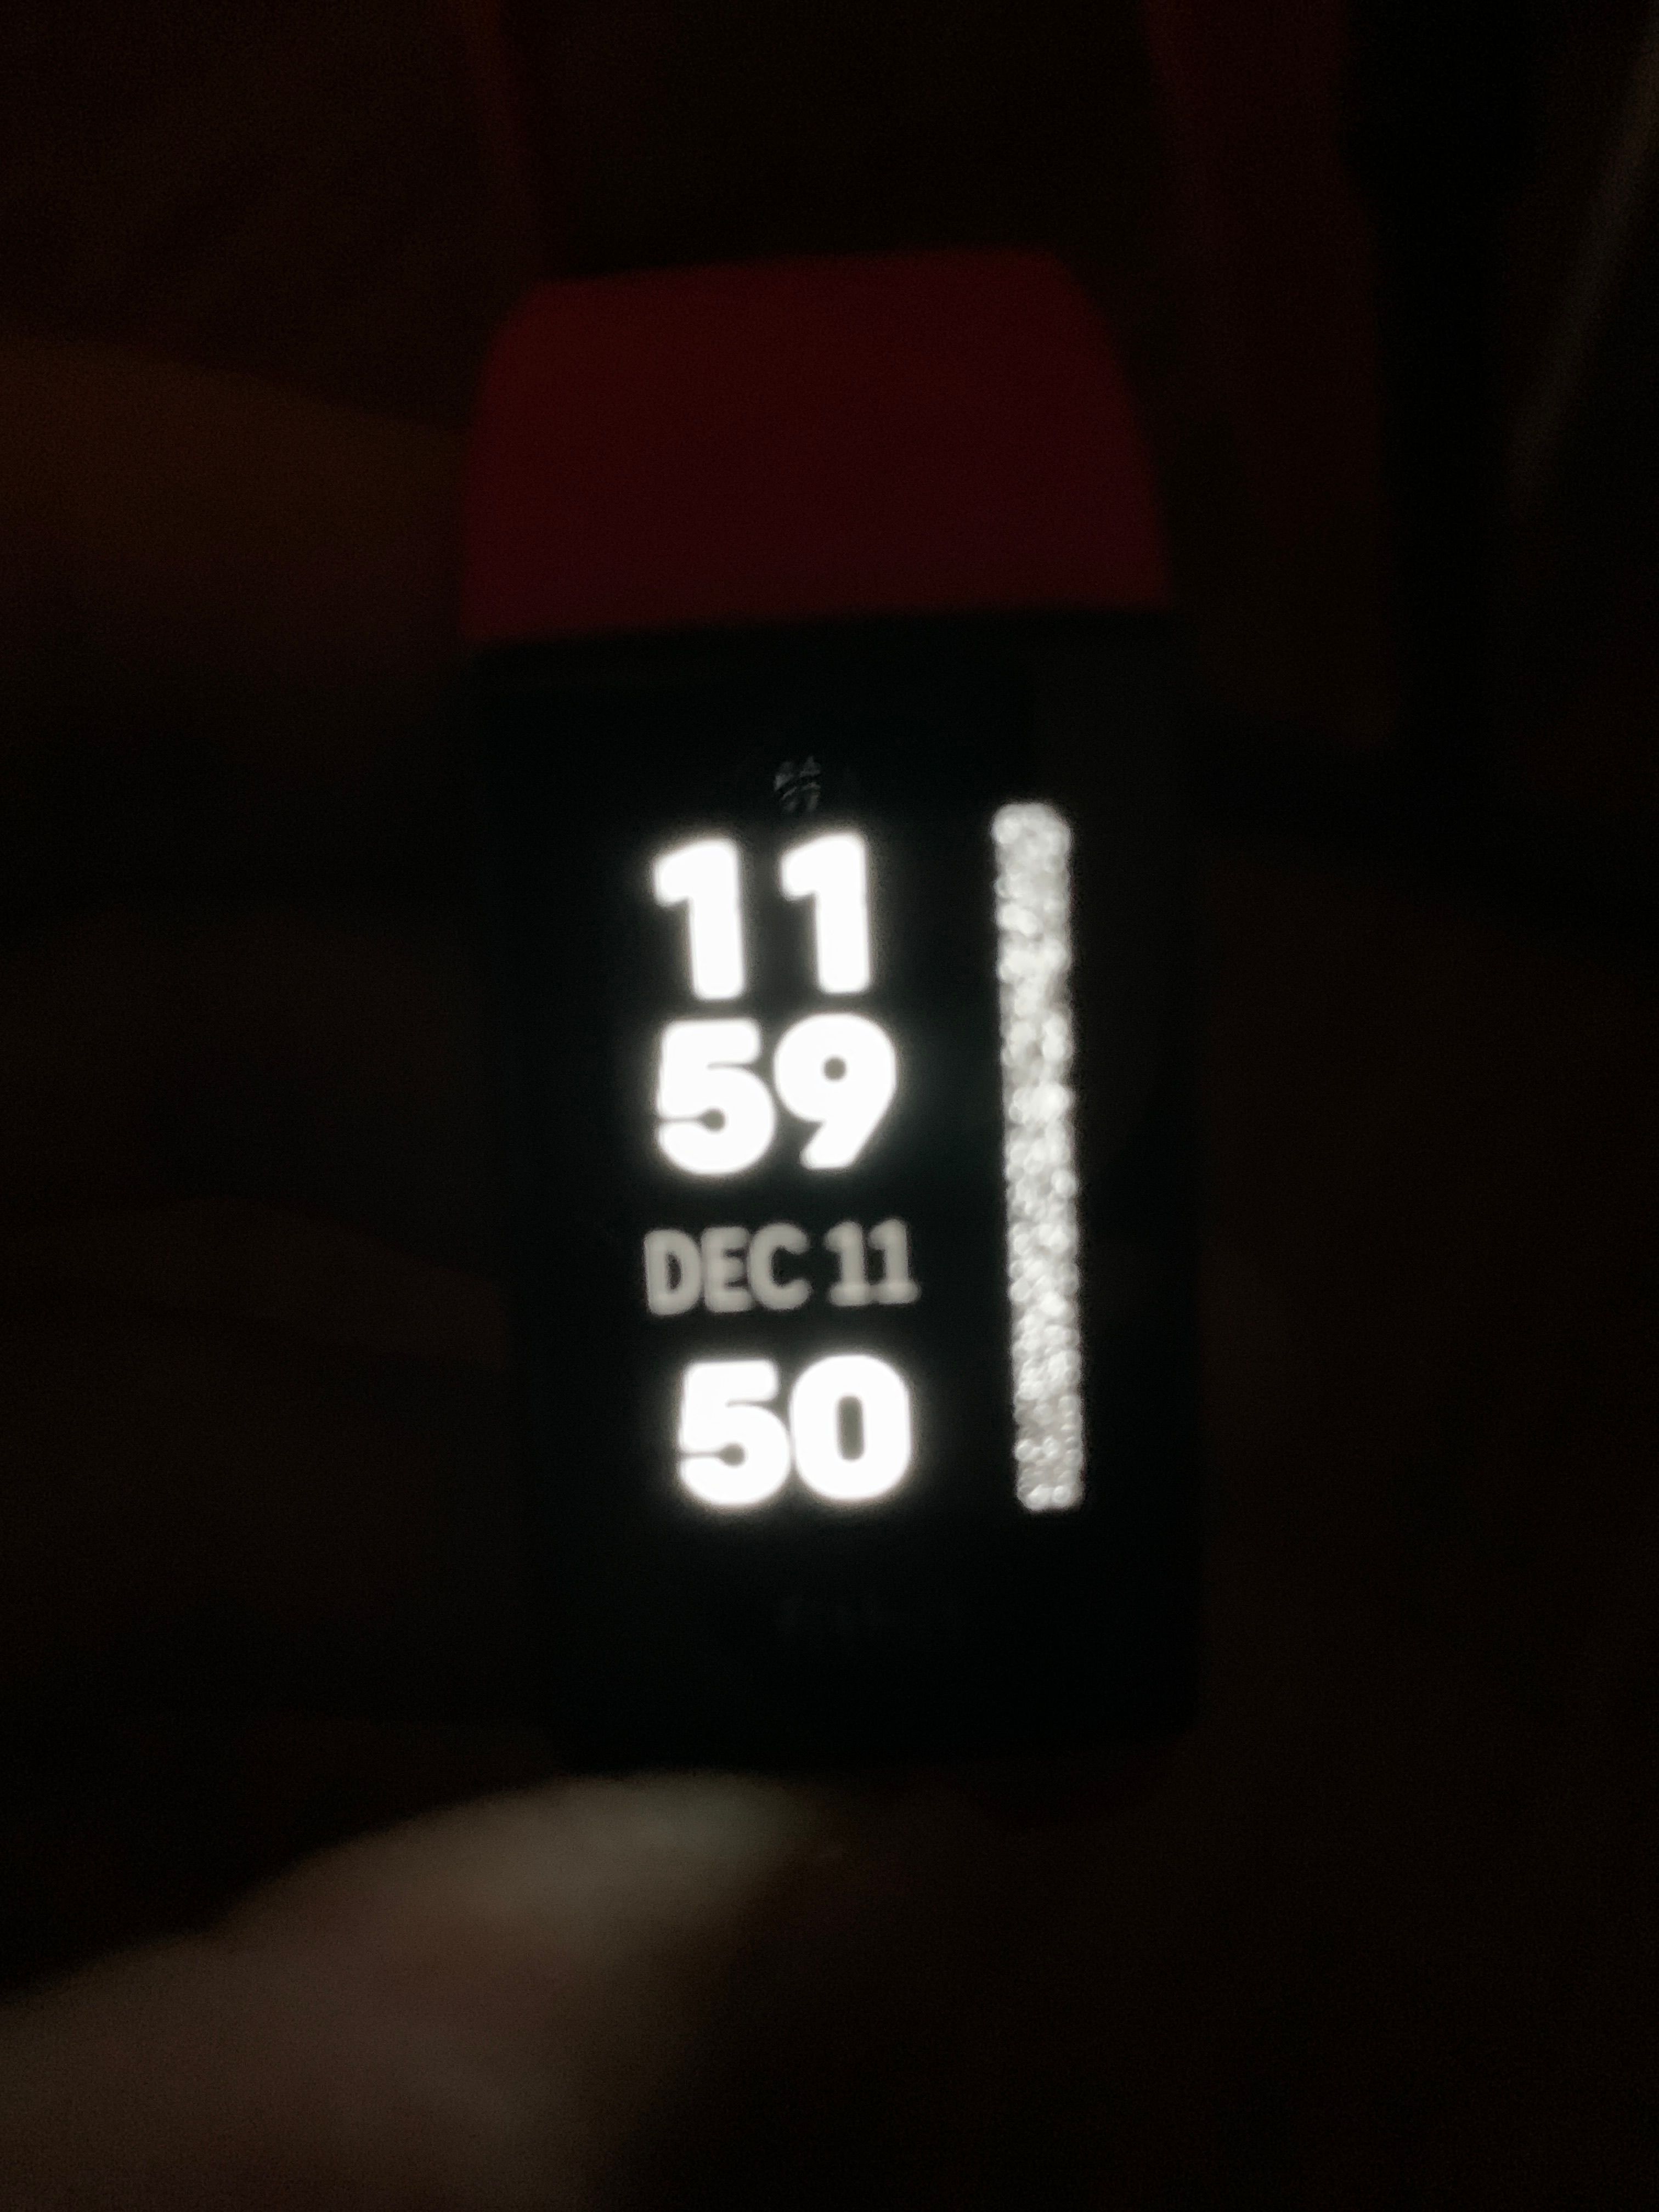 the screen on my fitbit is blank